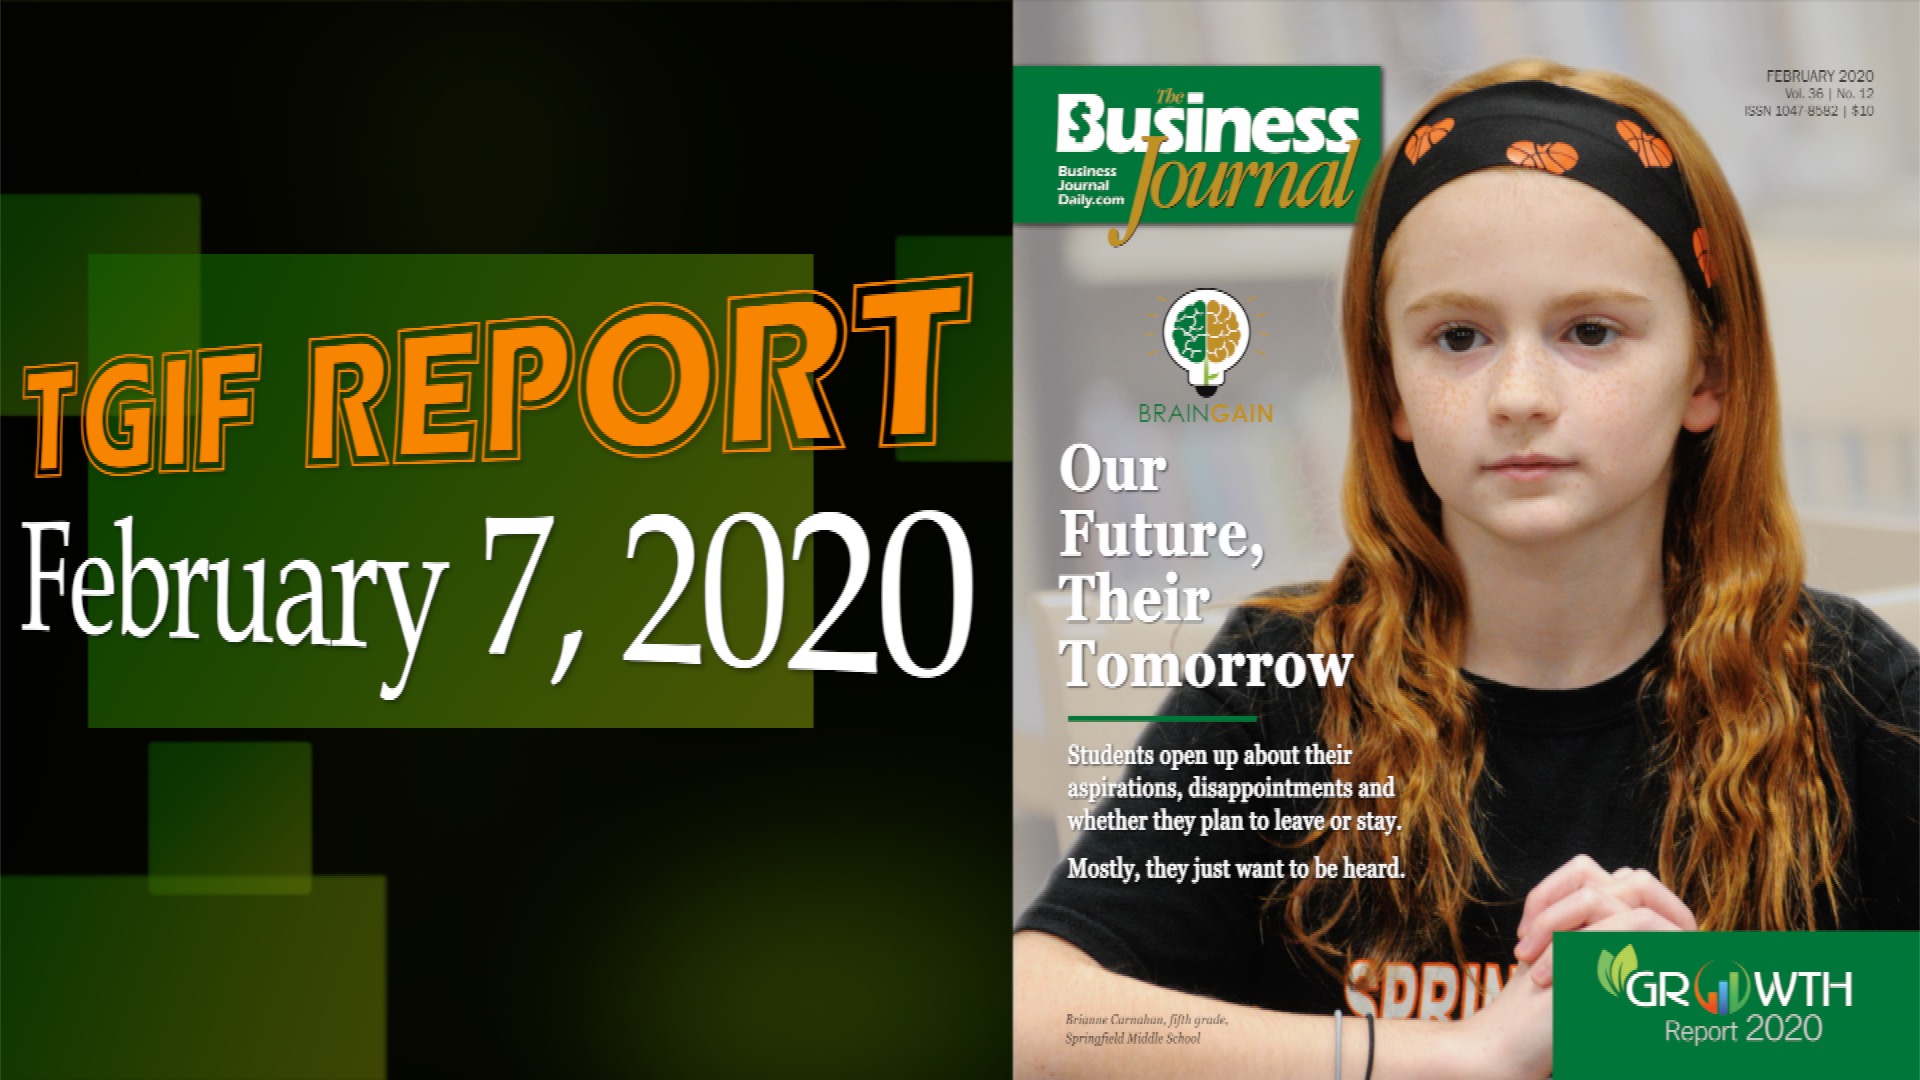 Growth Report 2020